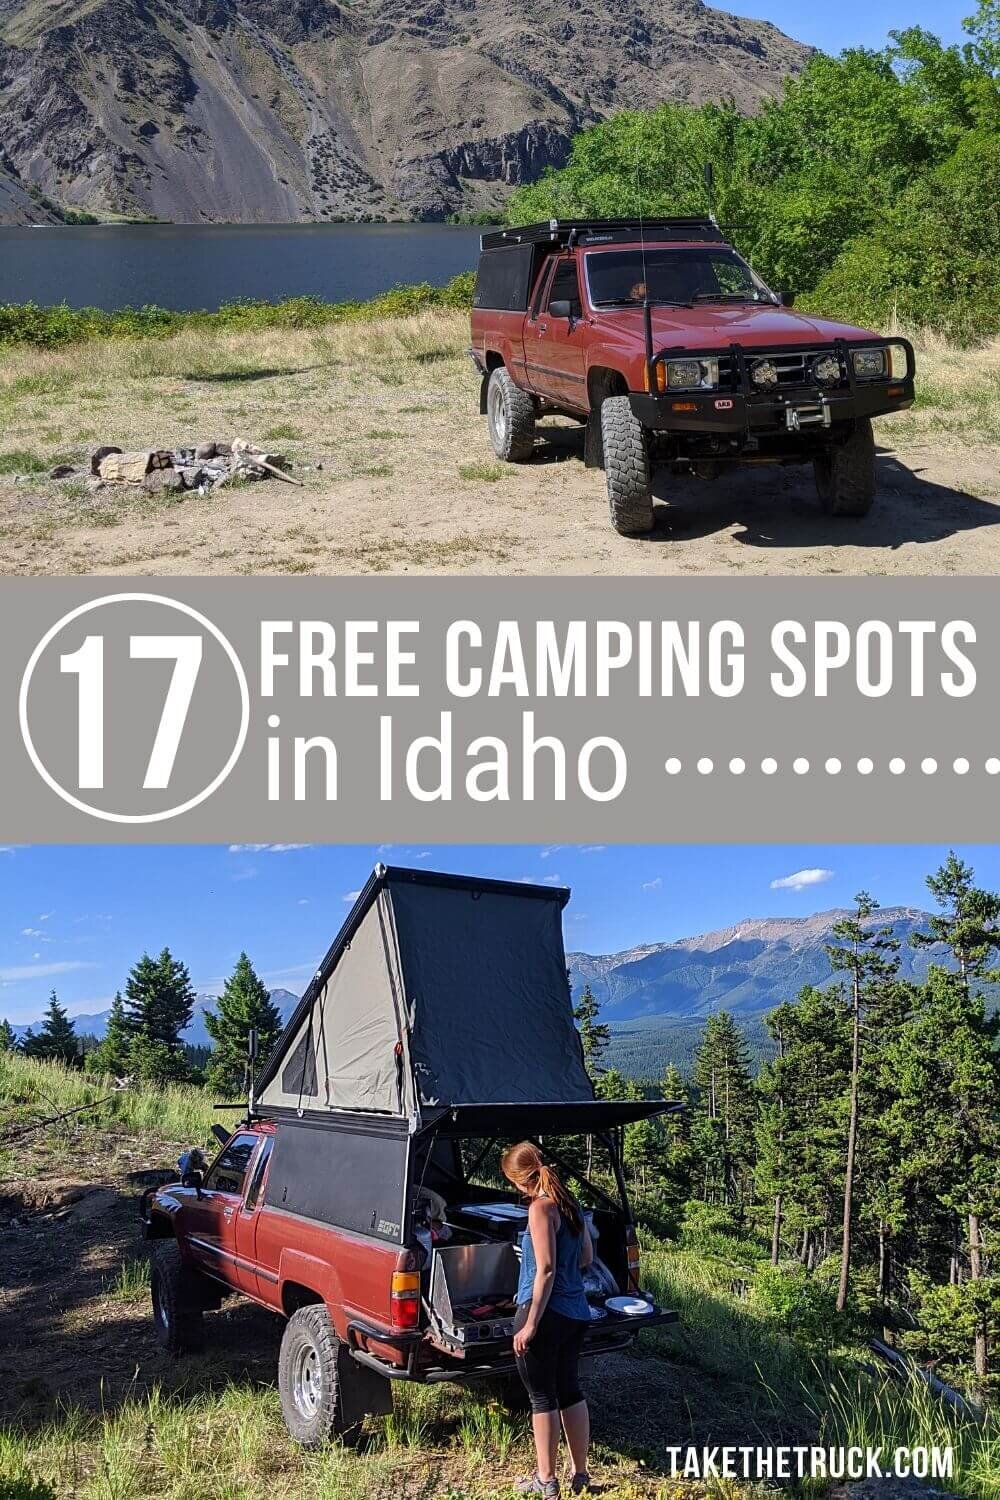 Looking for free camping in Idaho? This post gives all the details you’ll need about 17 different boondocking spots - either national forest camping or blm camping in Idaho.